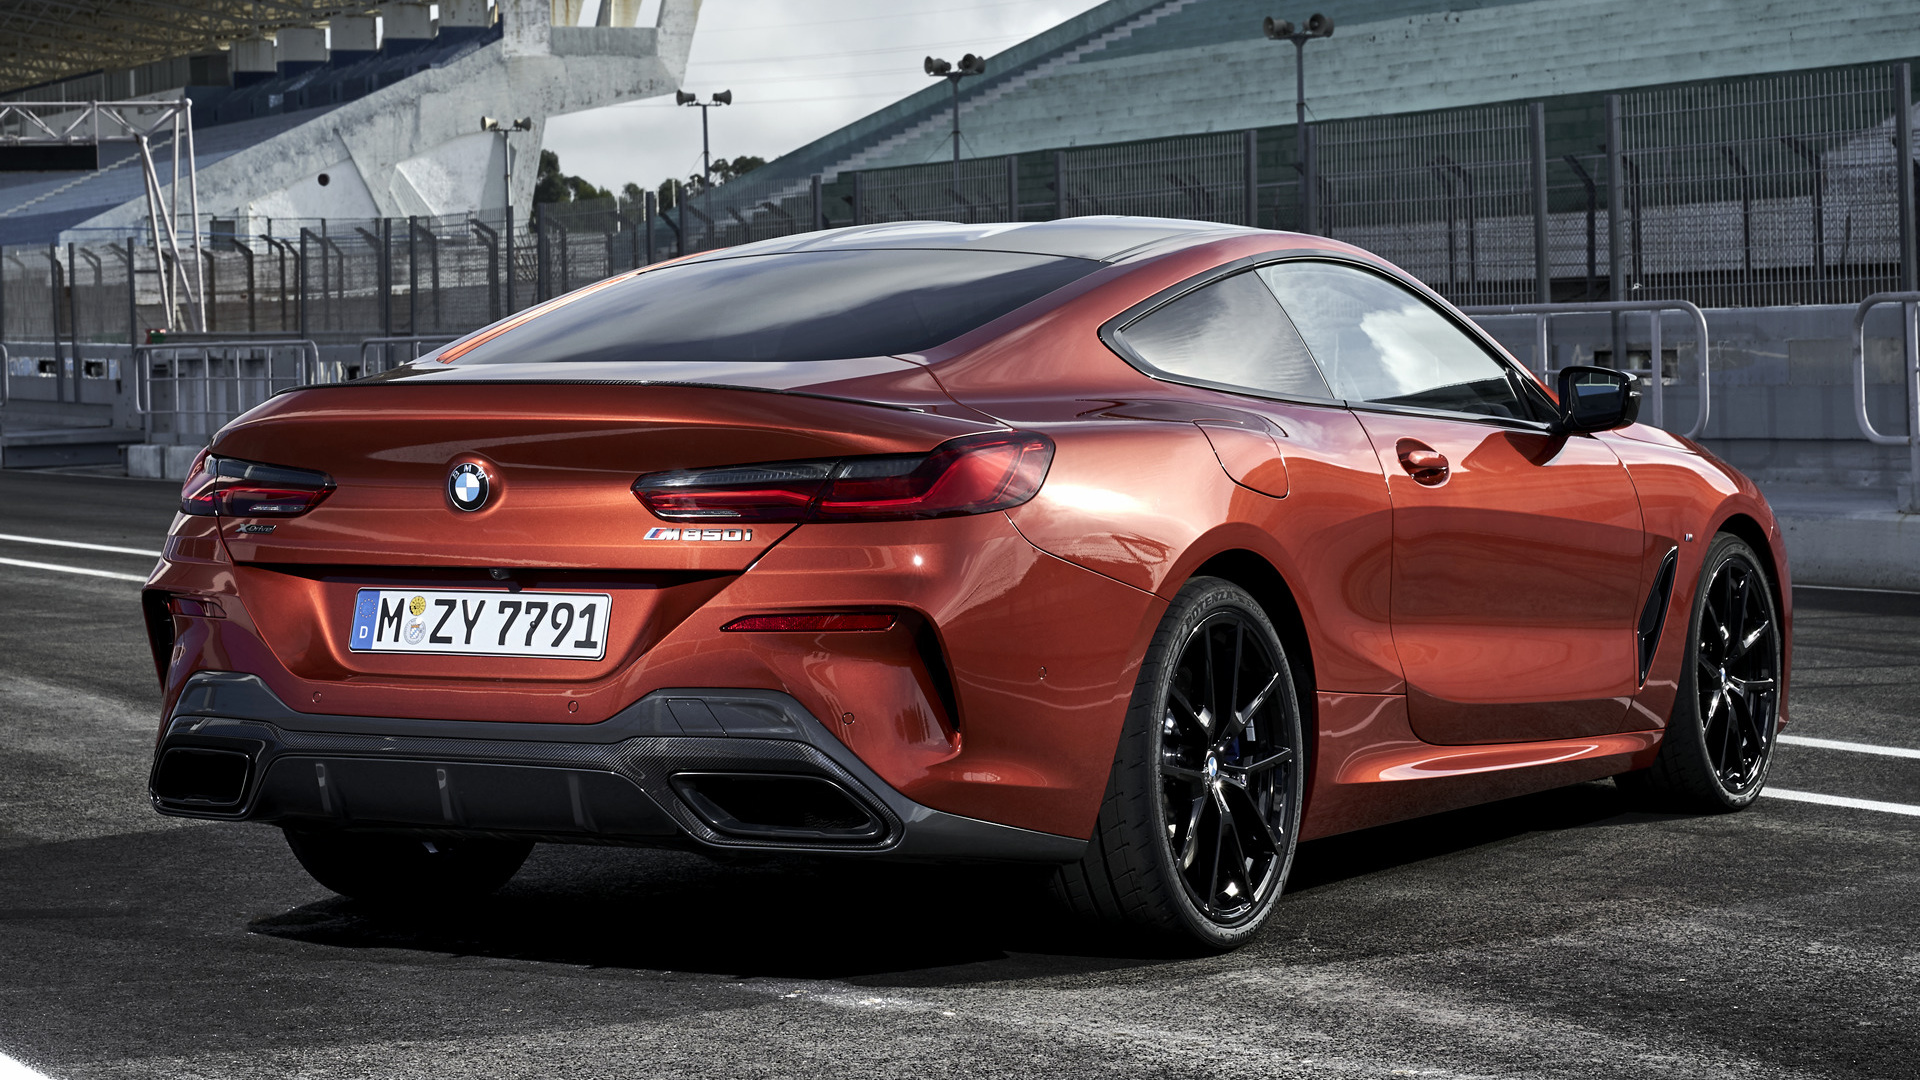 Bmw M850i Coupe Carbon Package Brown Car Car Coupe Grand Tourer Luxury Car 1920x1080